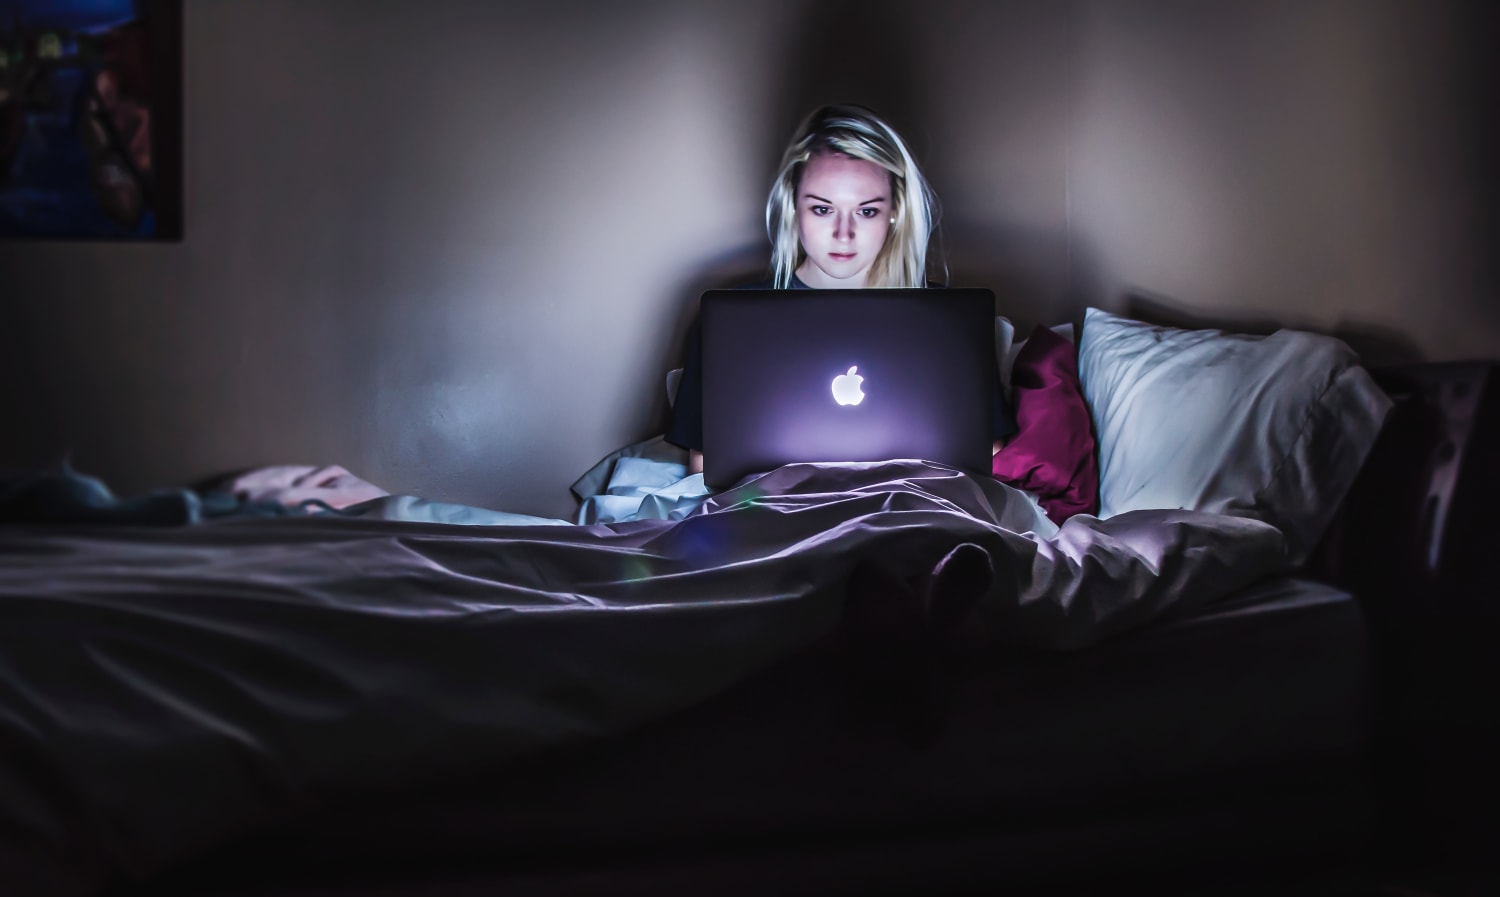 How does the use of electronic devices in the night ruin our sleep and health?